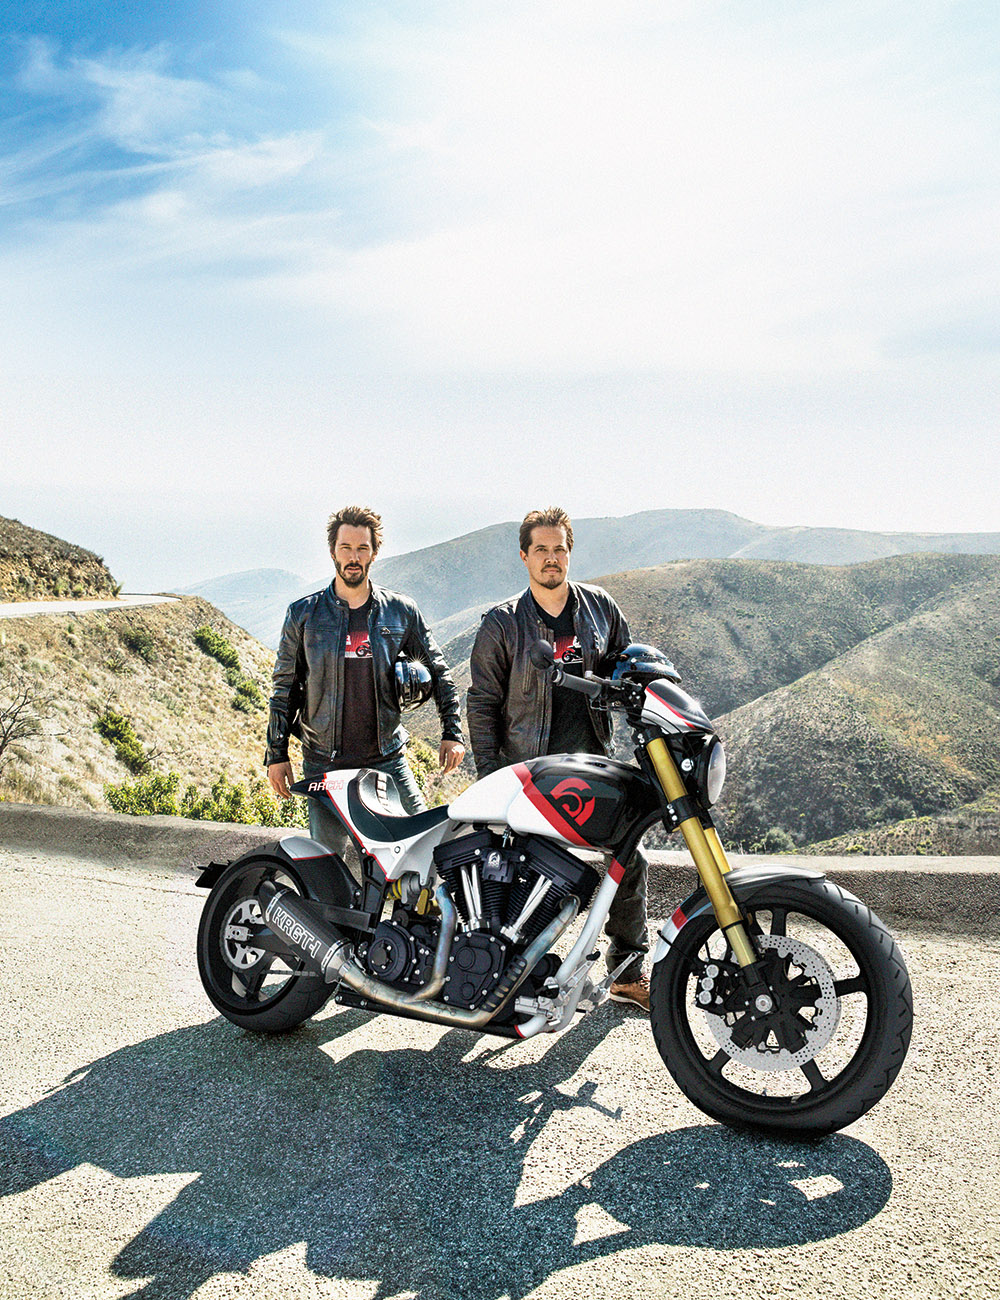 Arch Motorcycle & Ride Experience